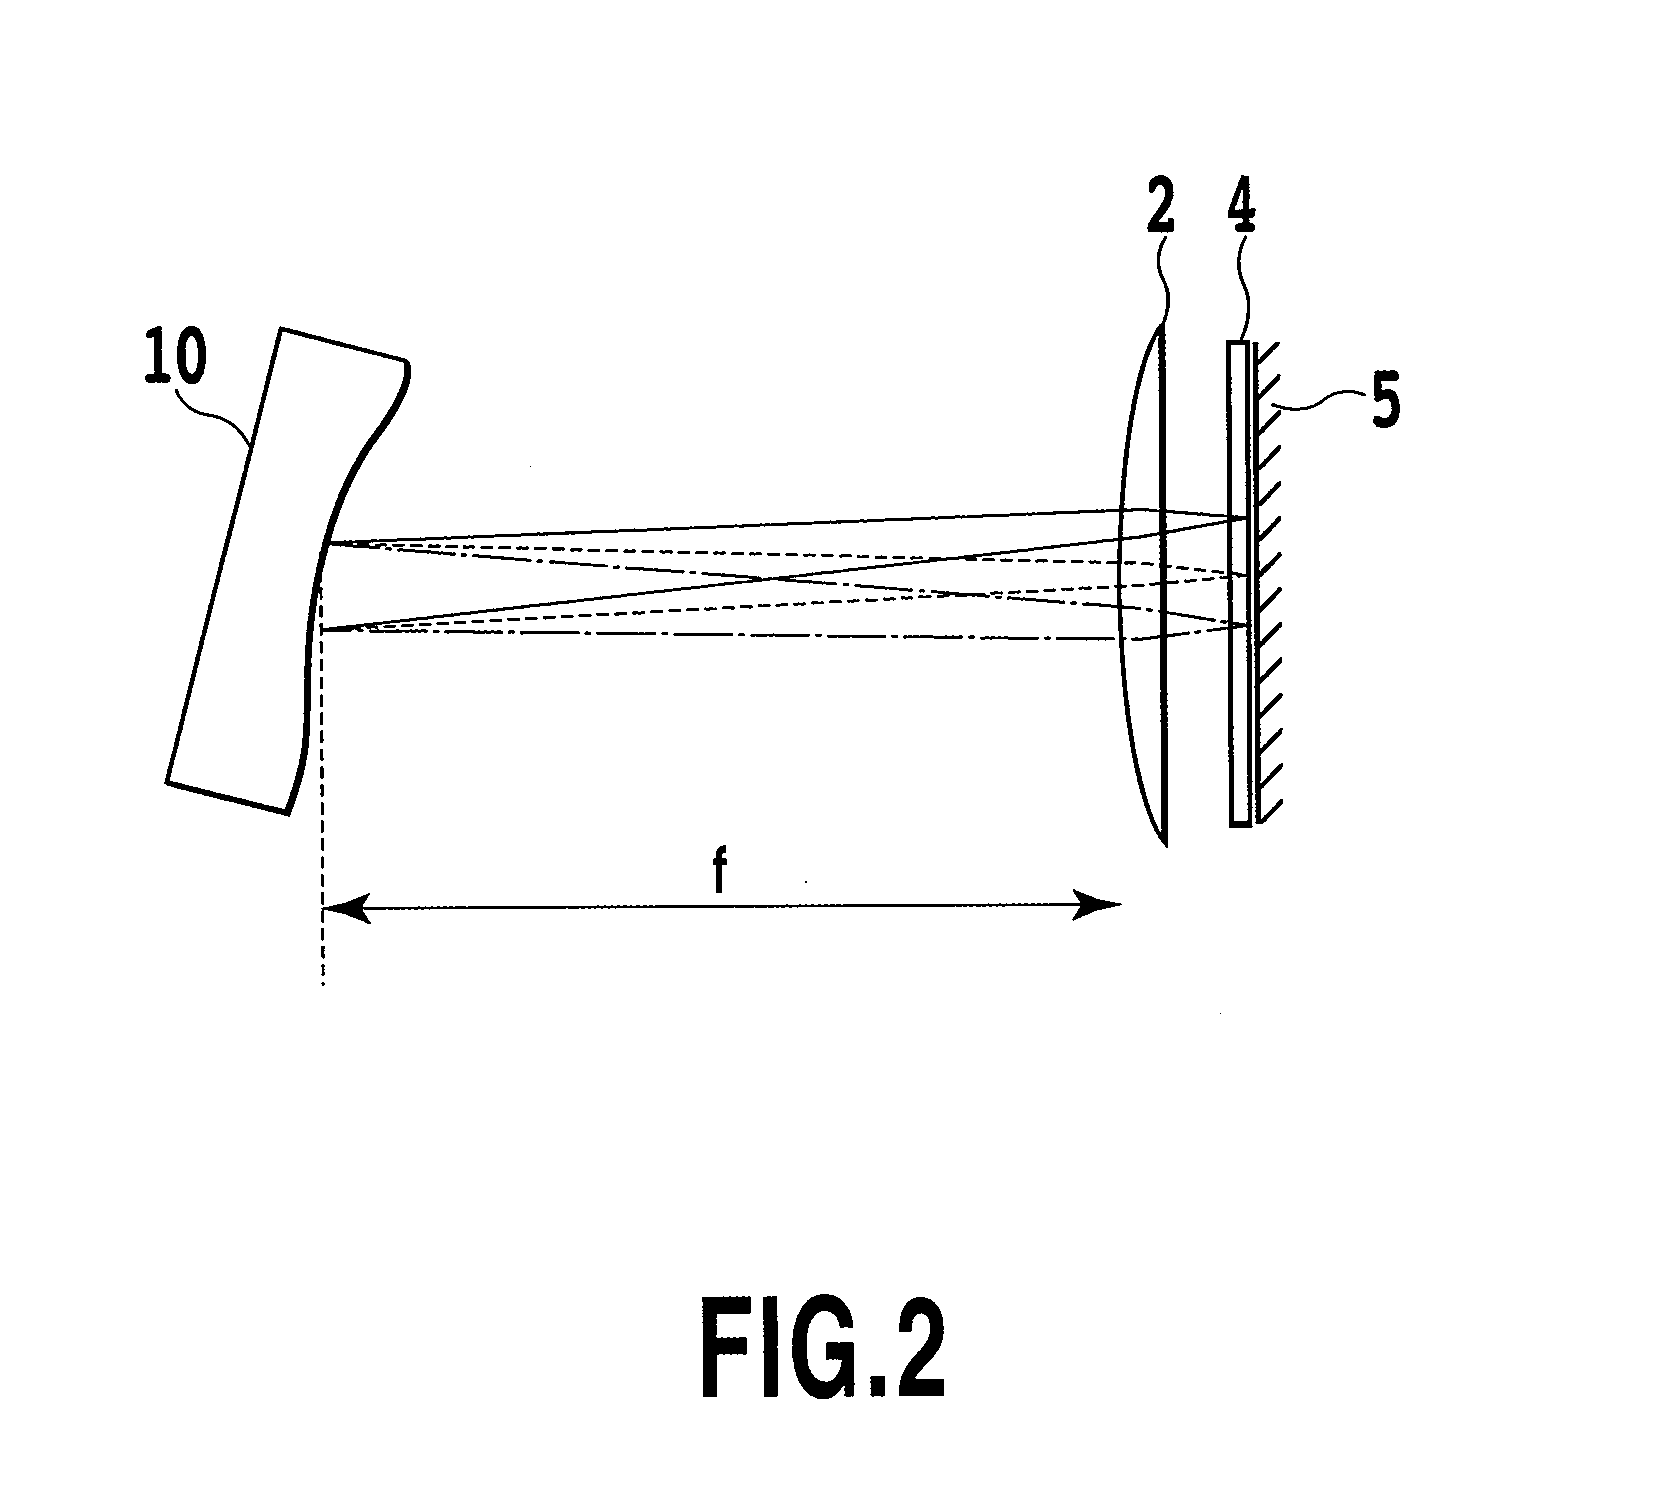 Optical signal processing device